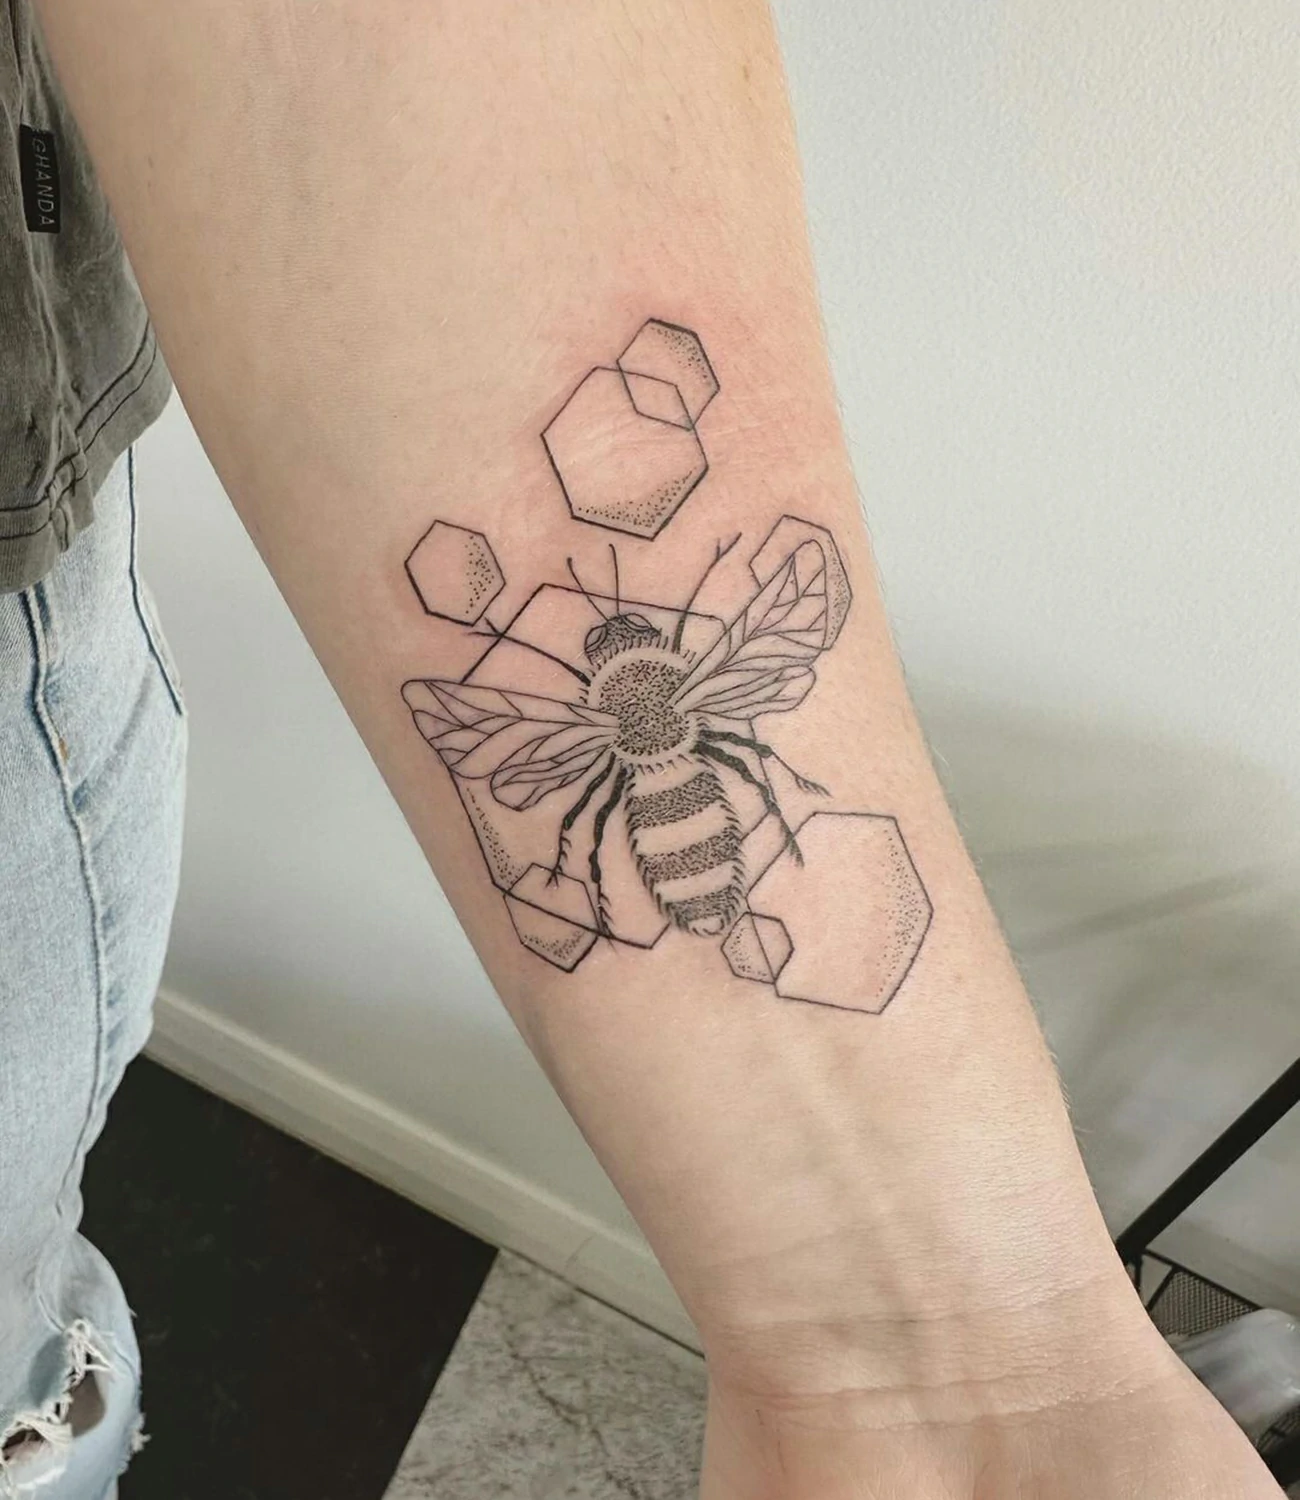 Geometric Bee Tattoo: Geometric bee tattoos blend the industrious image of a bee with geometric shapes, symbolizing hard work and community.